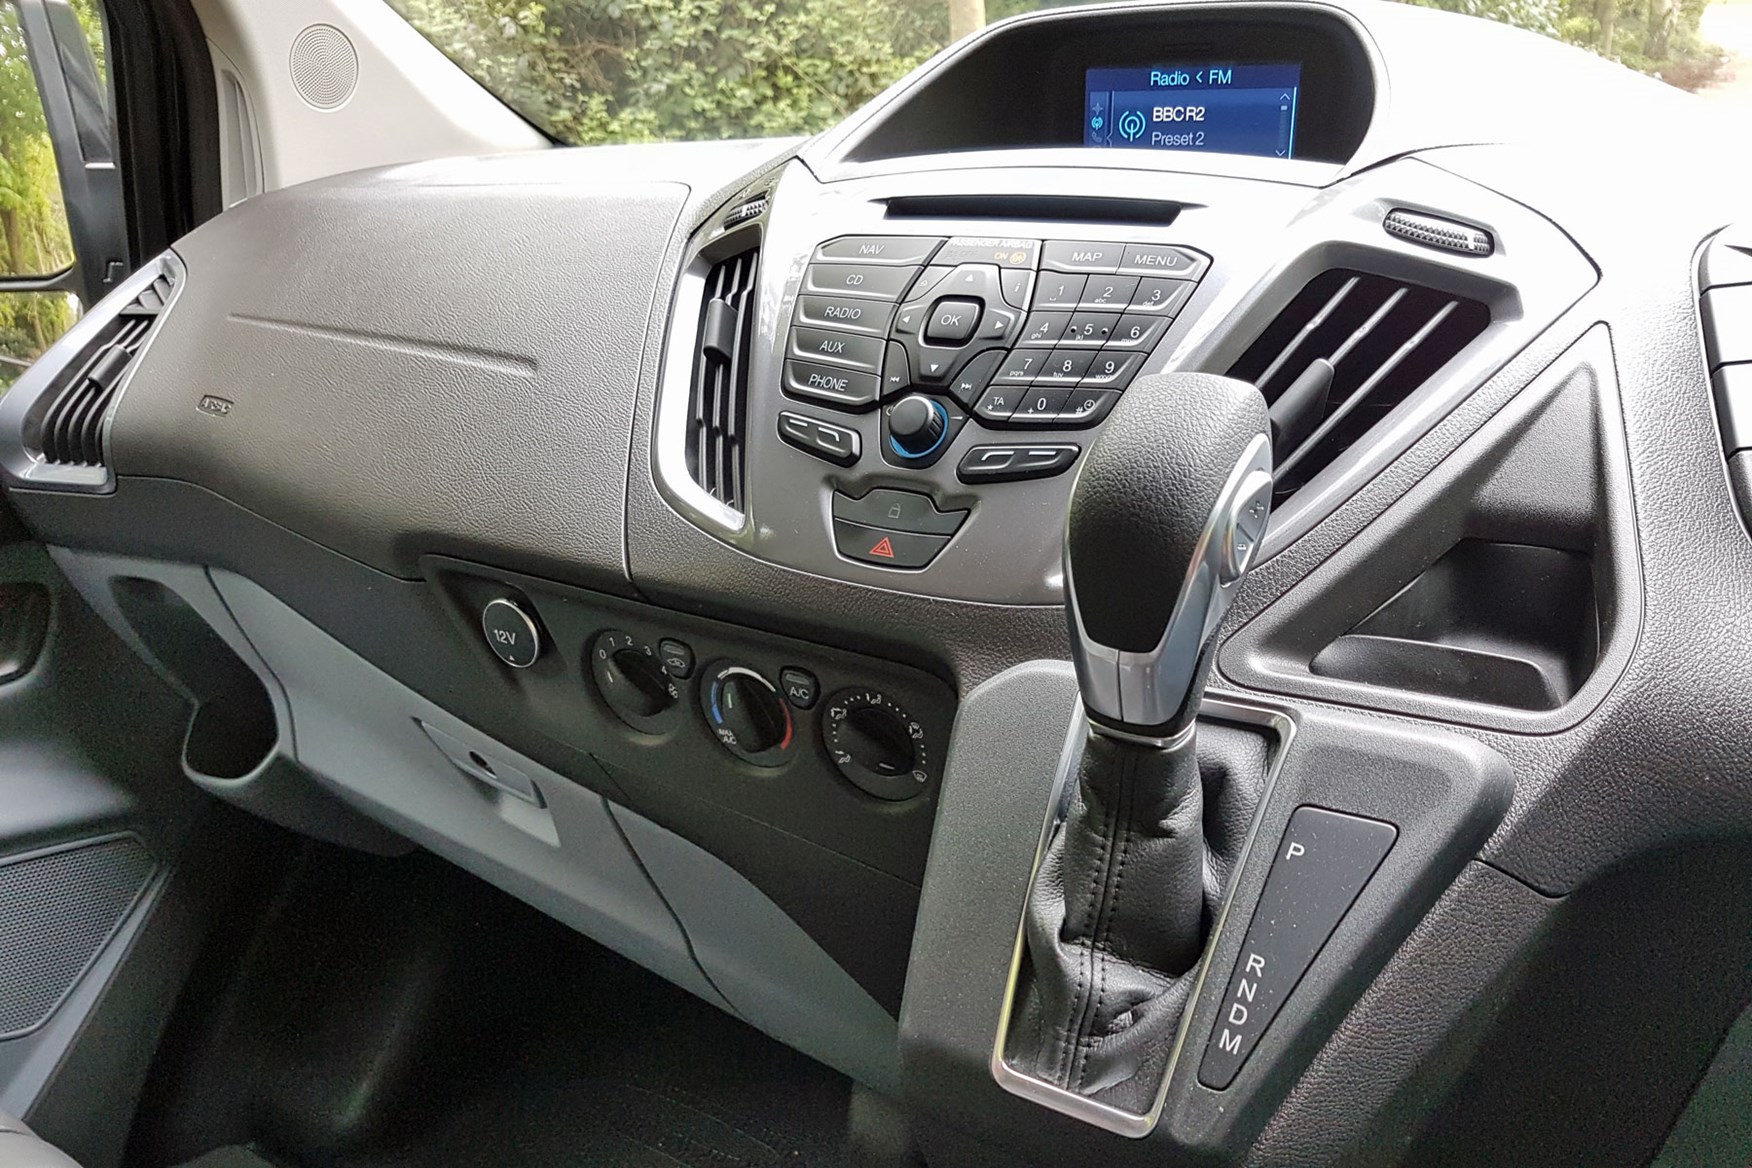 Ford Transit Custom Sport automatic gearshifter